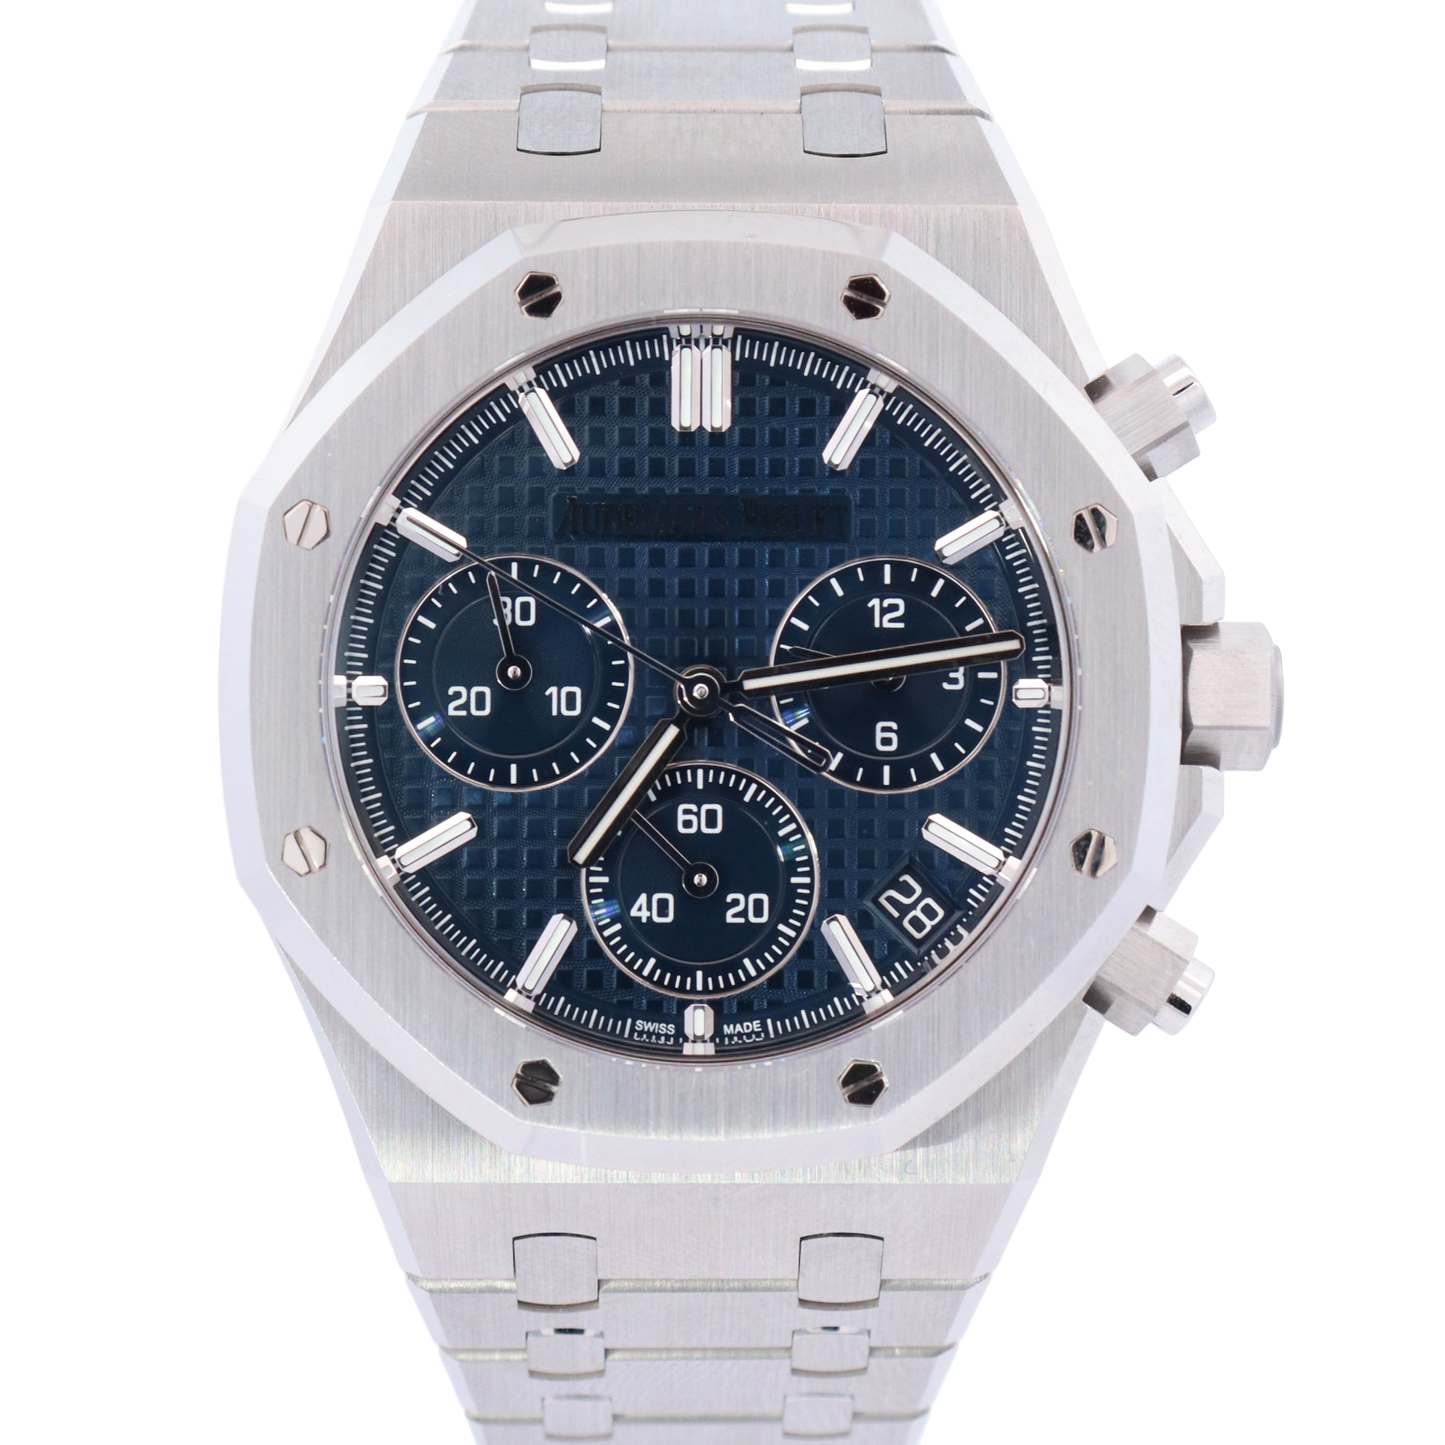 Audemars Piguet Royal Oak "50th Anniversary" 41mm Stainless Steel Blue Chronograph Dial Watch# 26240ST.OO.1320ST.01 - Happy Jewelers Fine Jewelry Lifetime Warranty